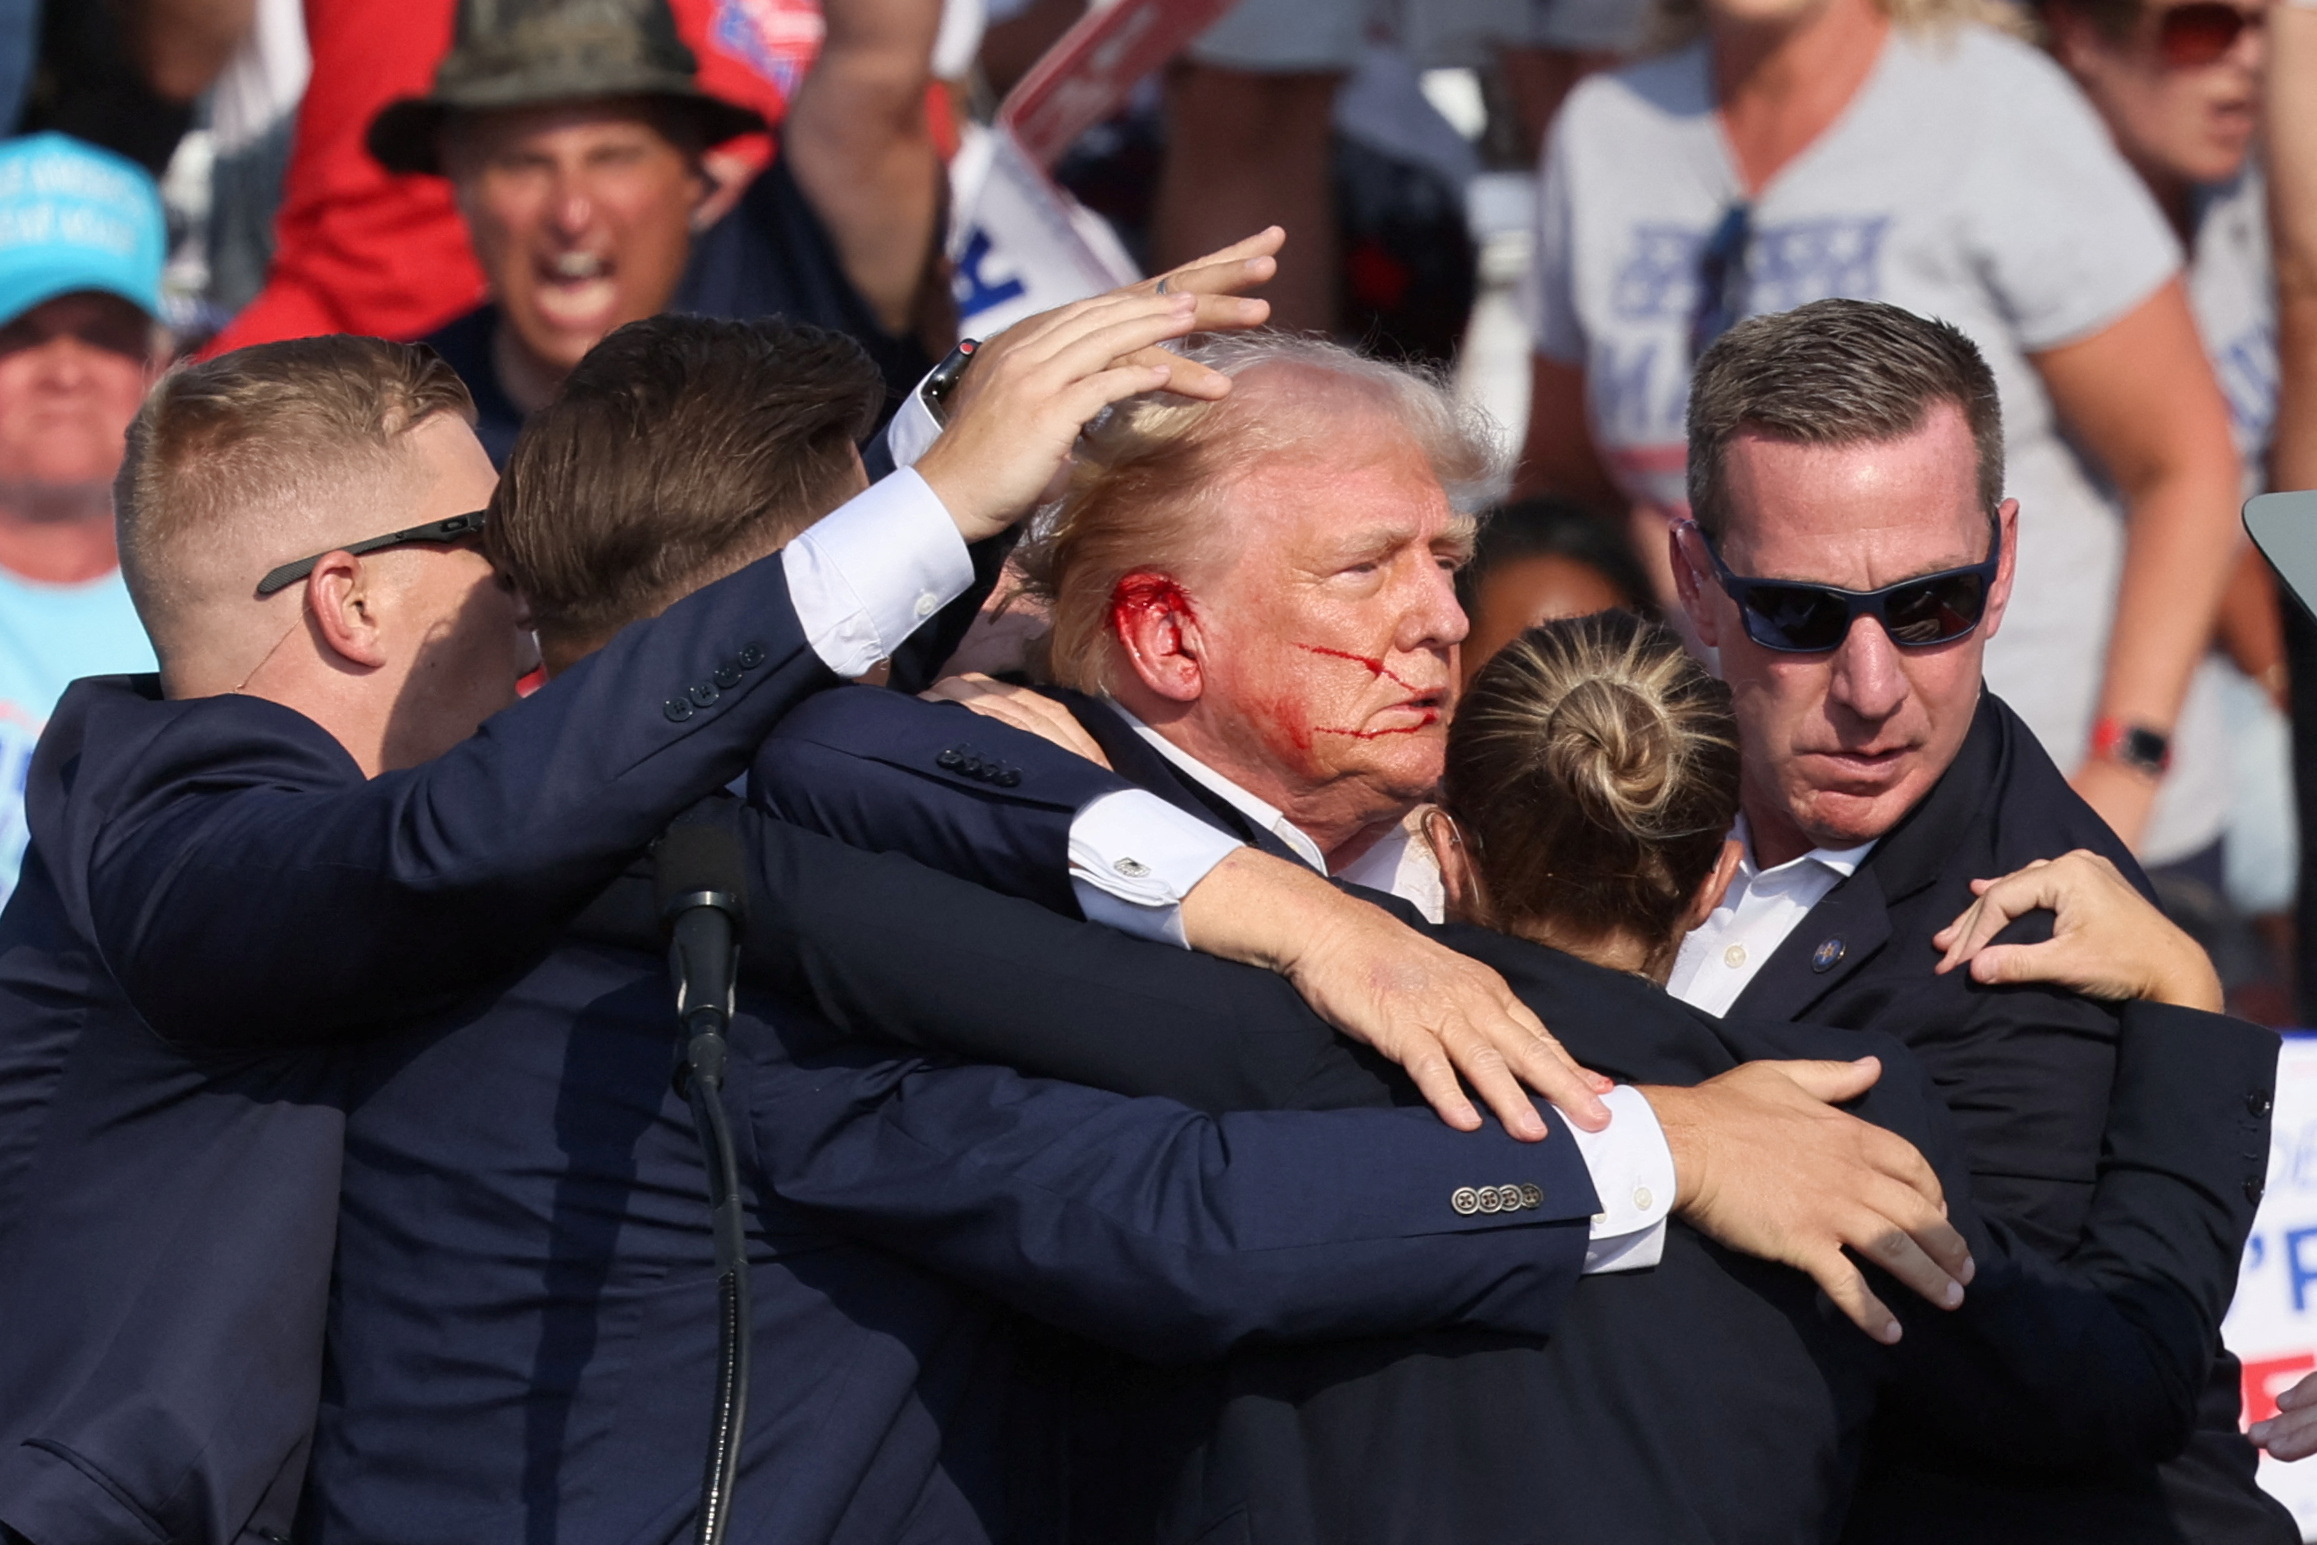 FBI says Trump was struck by bullet in assassination attempt at campaign rally